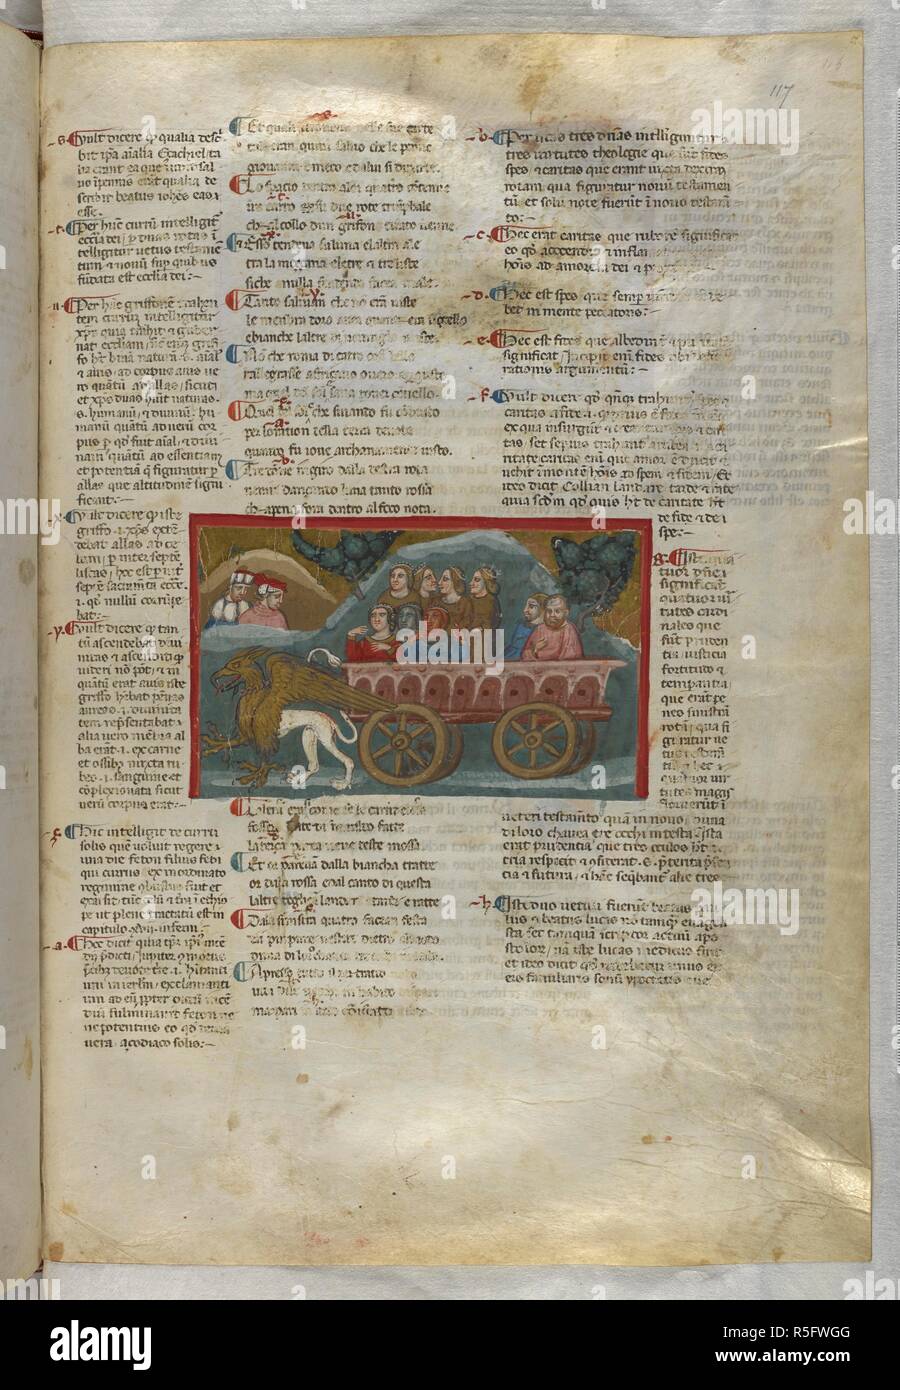 Purgatorio: They see a cart pulled by a griffon. Dante Alighieri, Divina Commedia ( The Divine Comedy ), with a commentary in Latin. 1st half of the 14th century. Source: Egerton 943, f.117. Language: Italian, Latin. Stock Photo